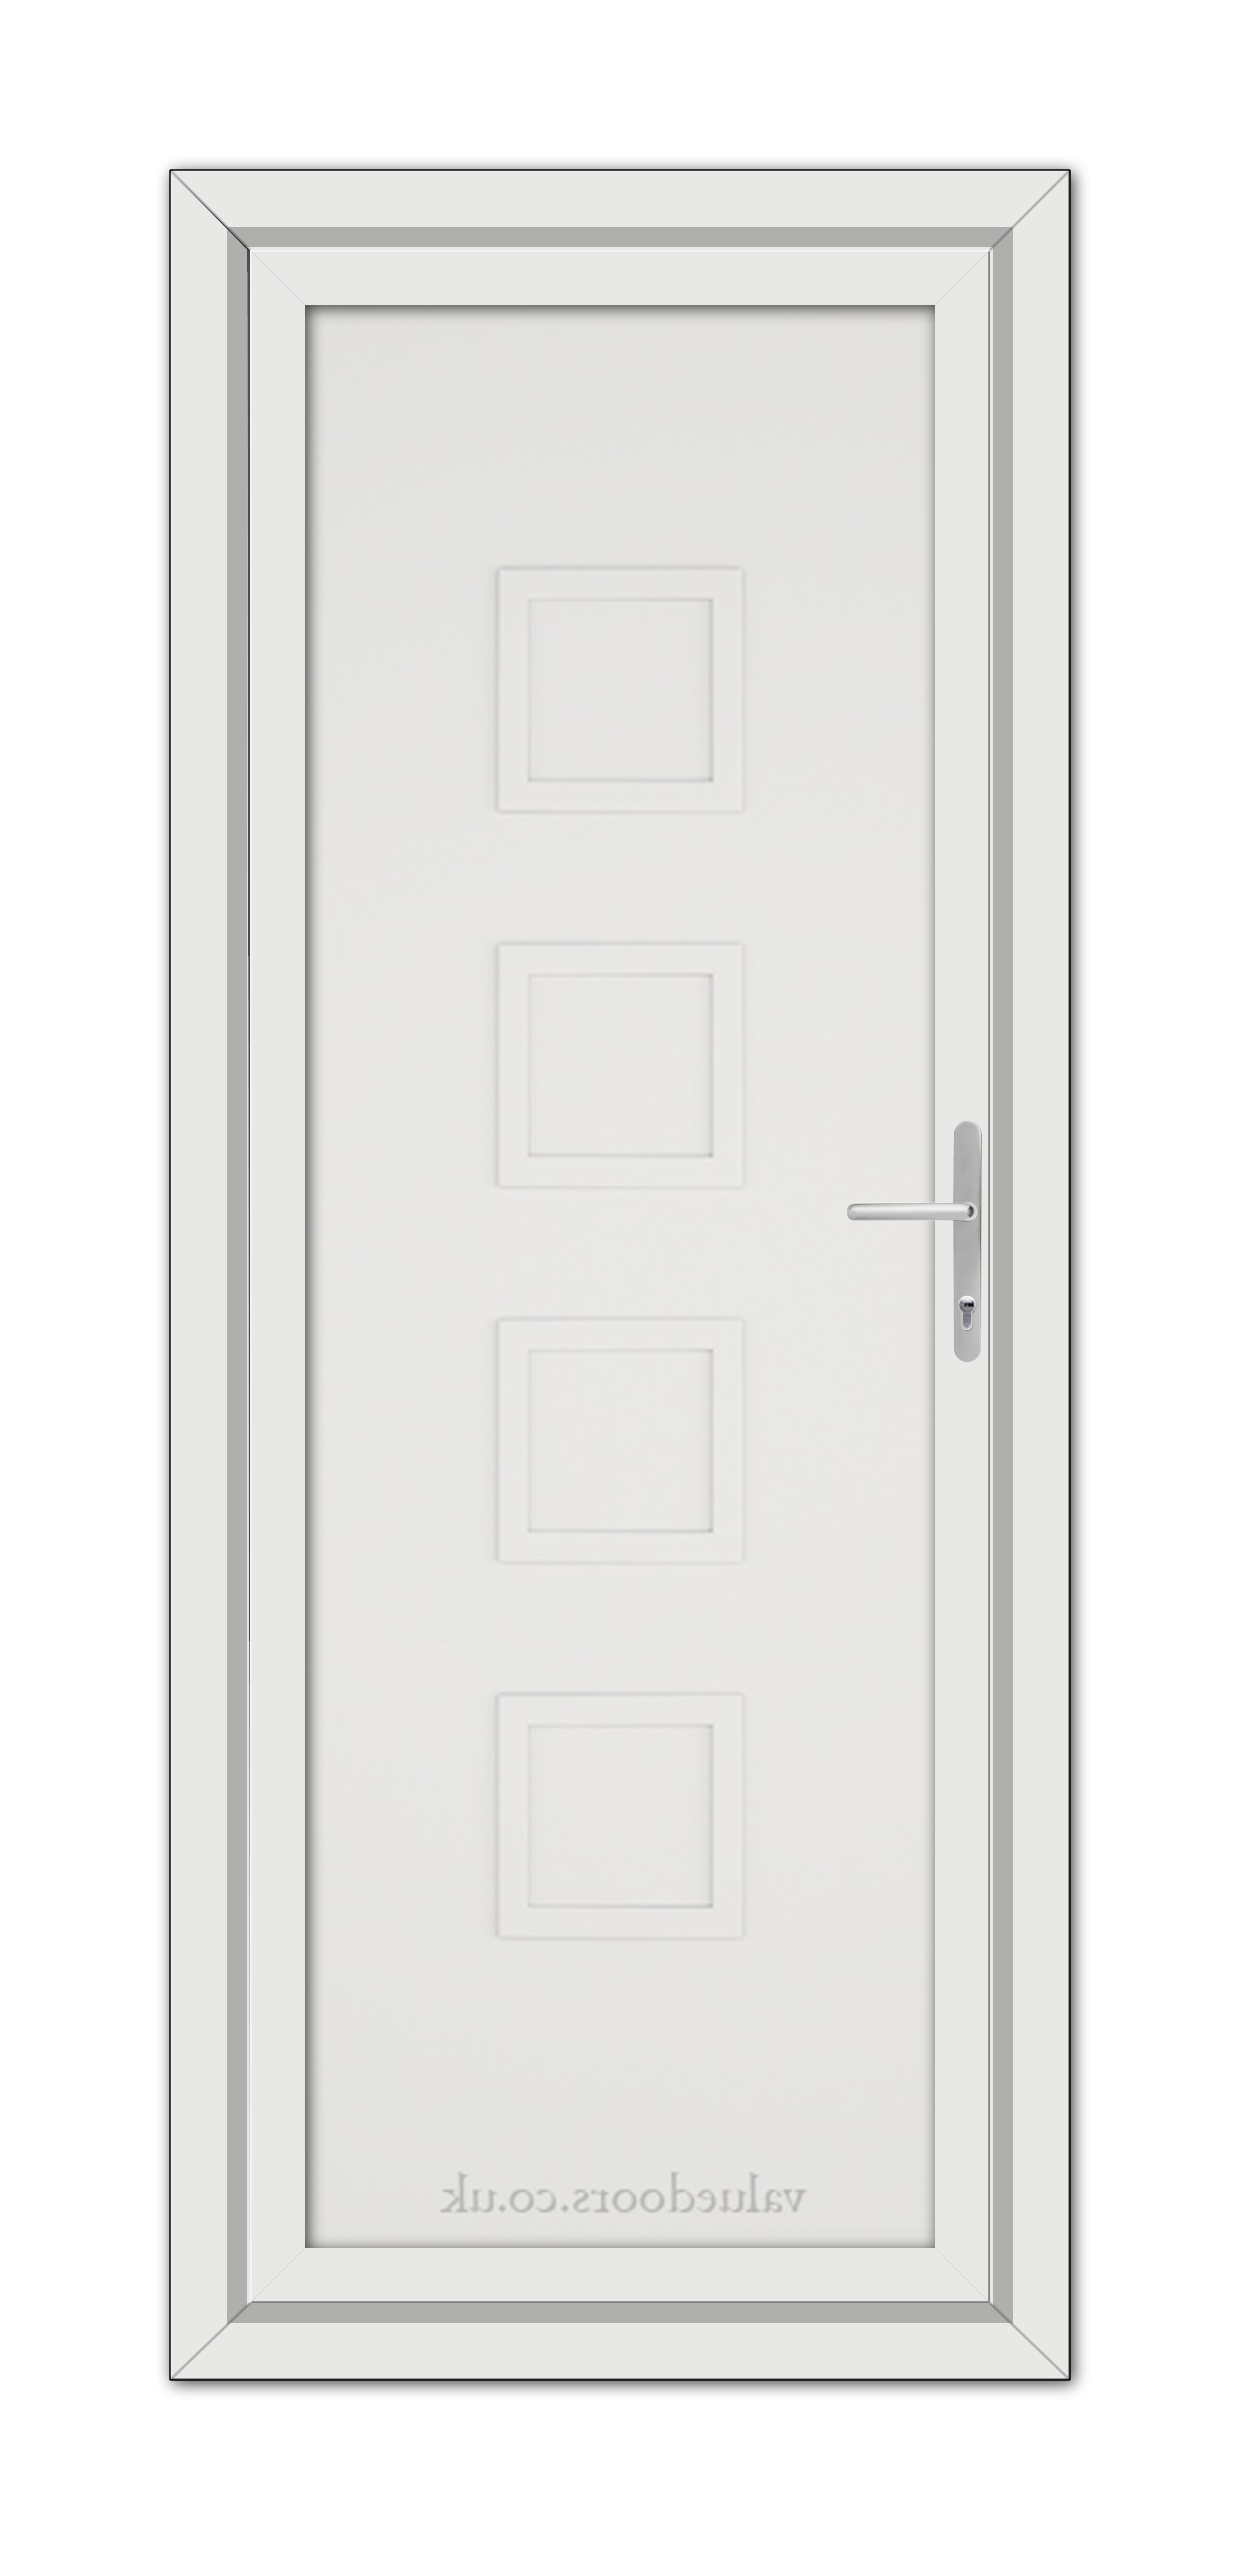 A White Modern 5034 Solid uPVC Door featuring a minimalist design with four recessed panels and a metallic handle, displayed against a plain background.